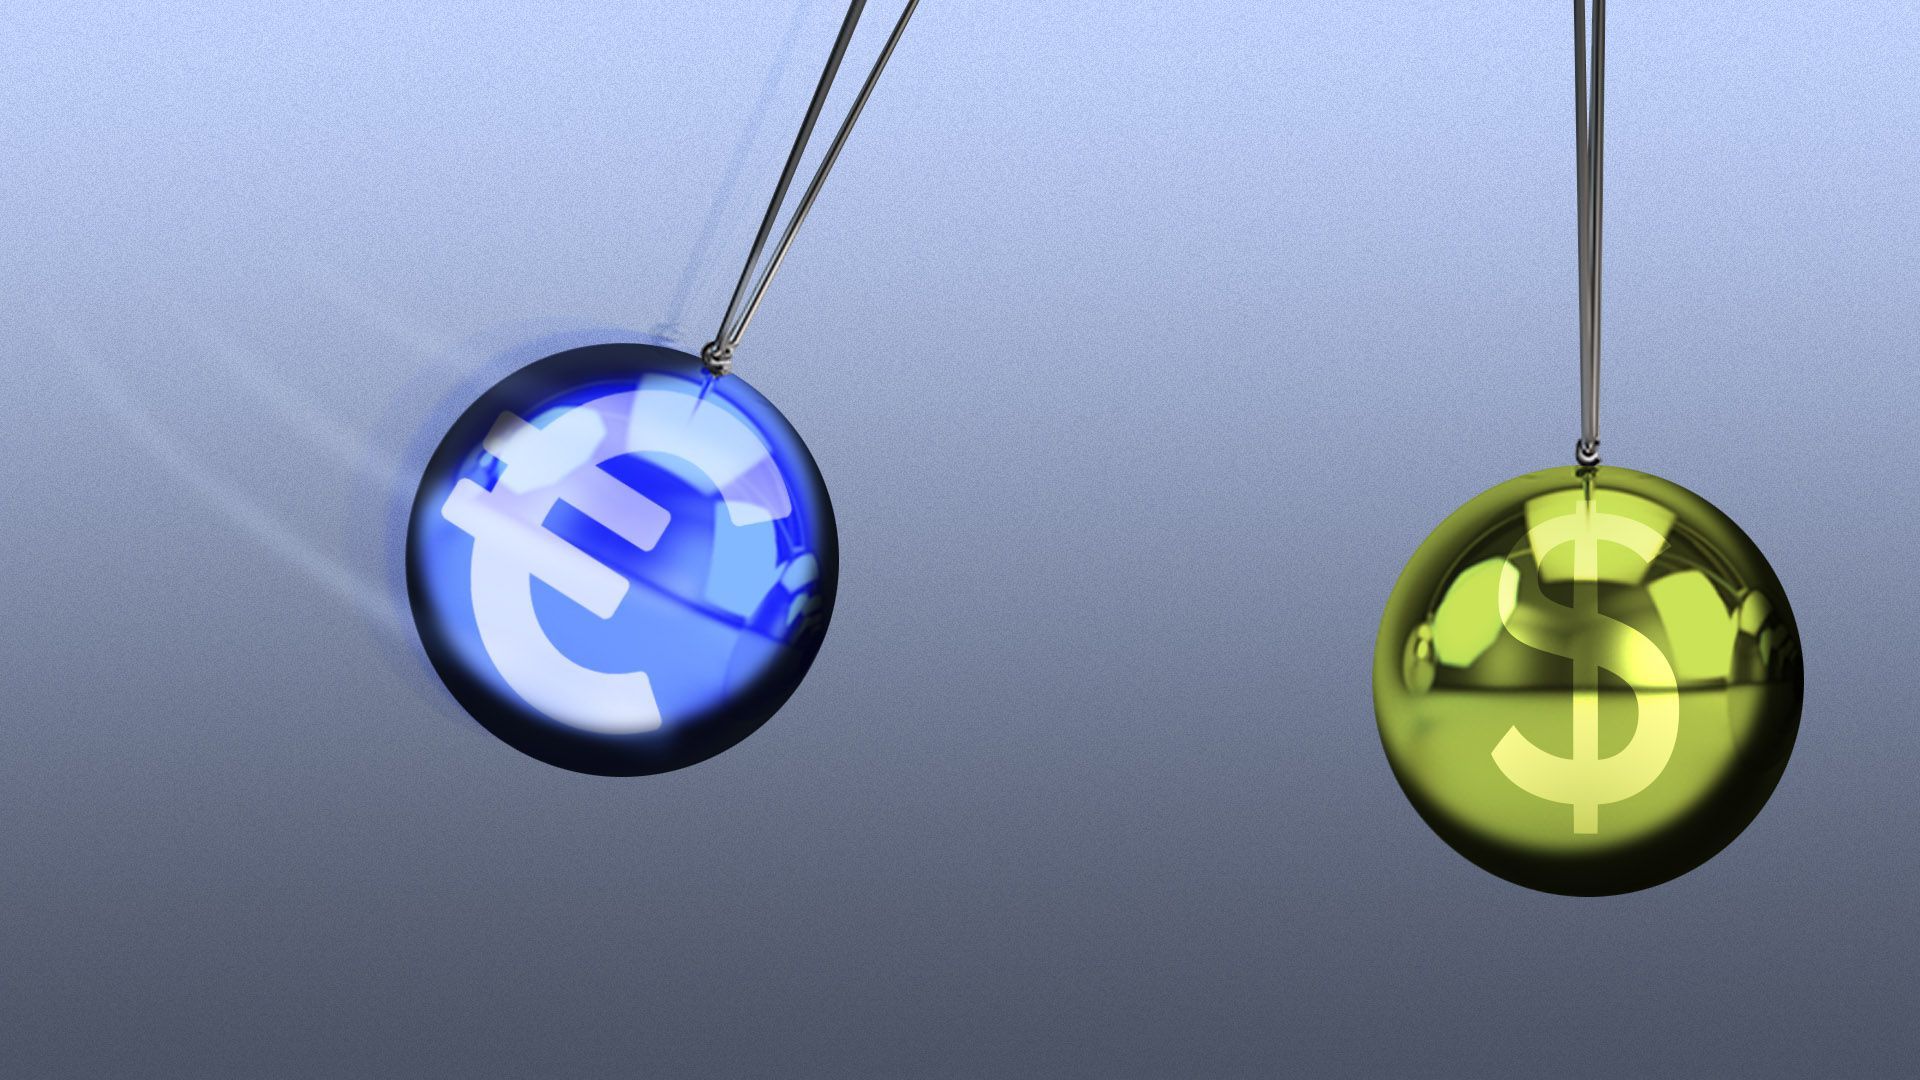 Illustration of two balls in a Newton's Cradle, one with a Euro symbol and the other with a dollar.